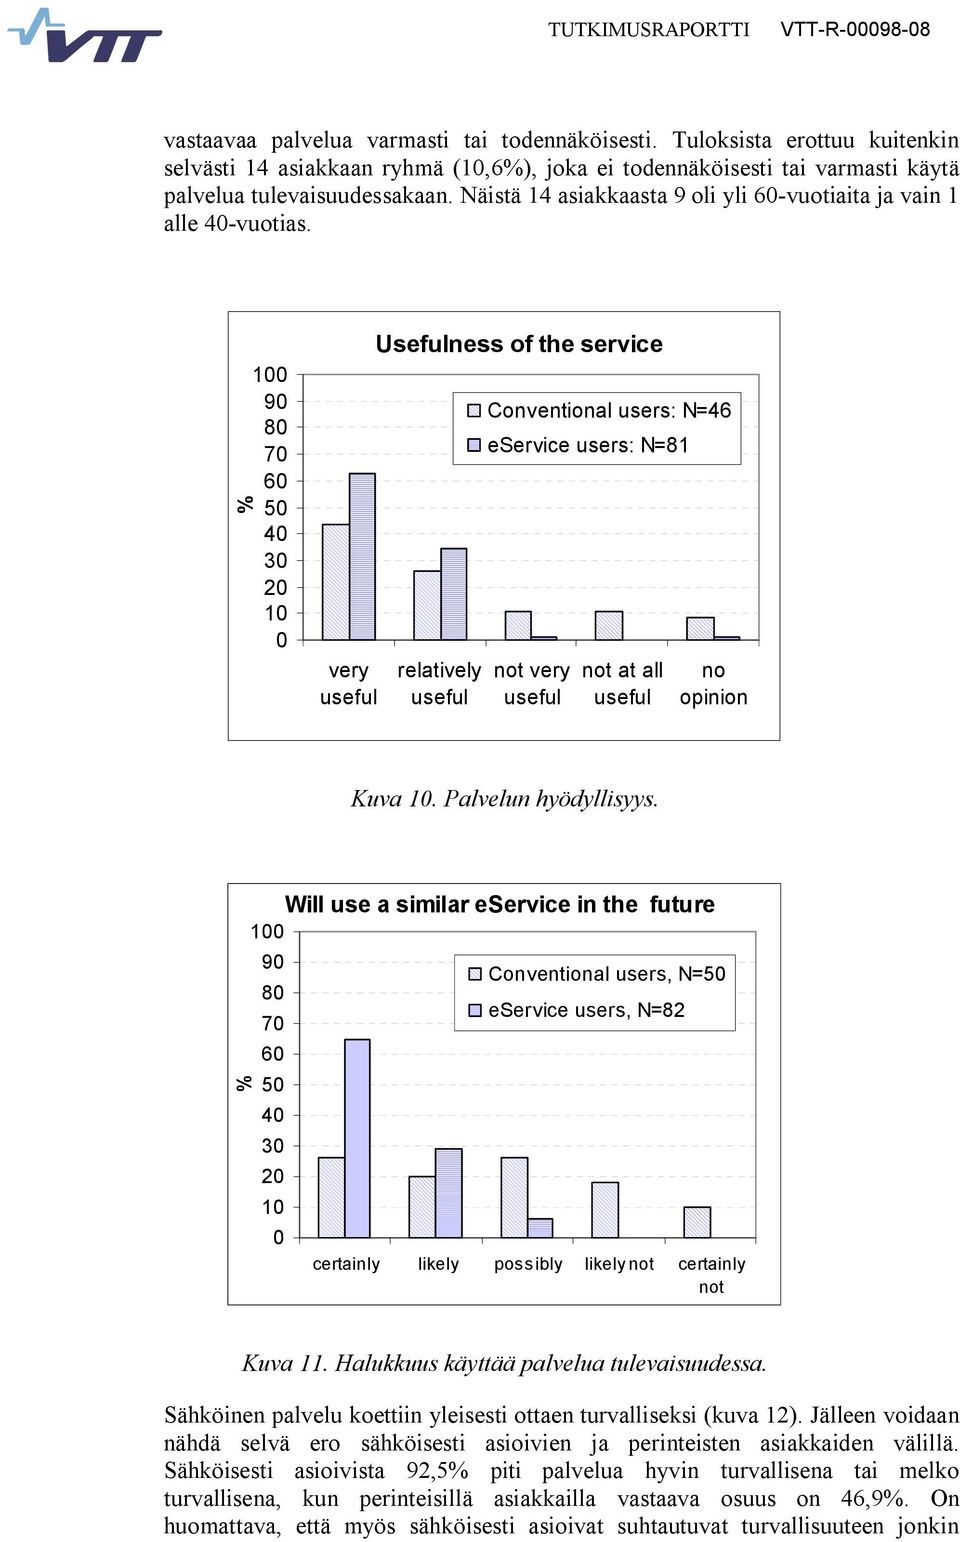 % 100 90 80 70 60 50 40 30 20 10 0 very useful Usefulness of the service relatively useful Conventional users: N=46 eservice users: N=81 not very useful not at all useful no opinion Kuva 10.